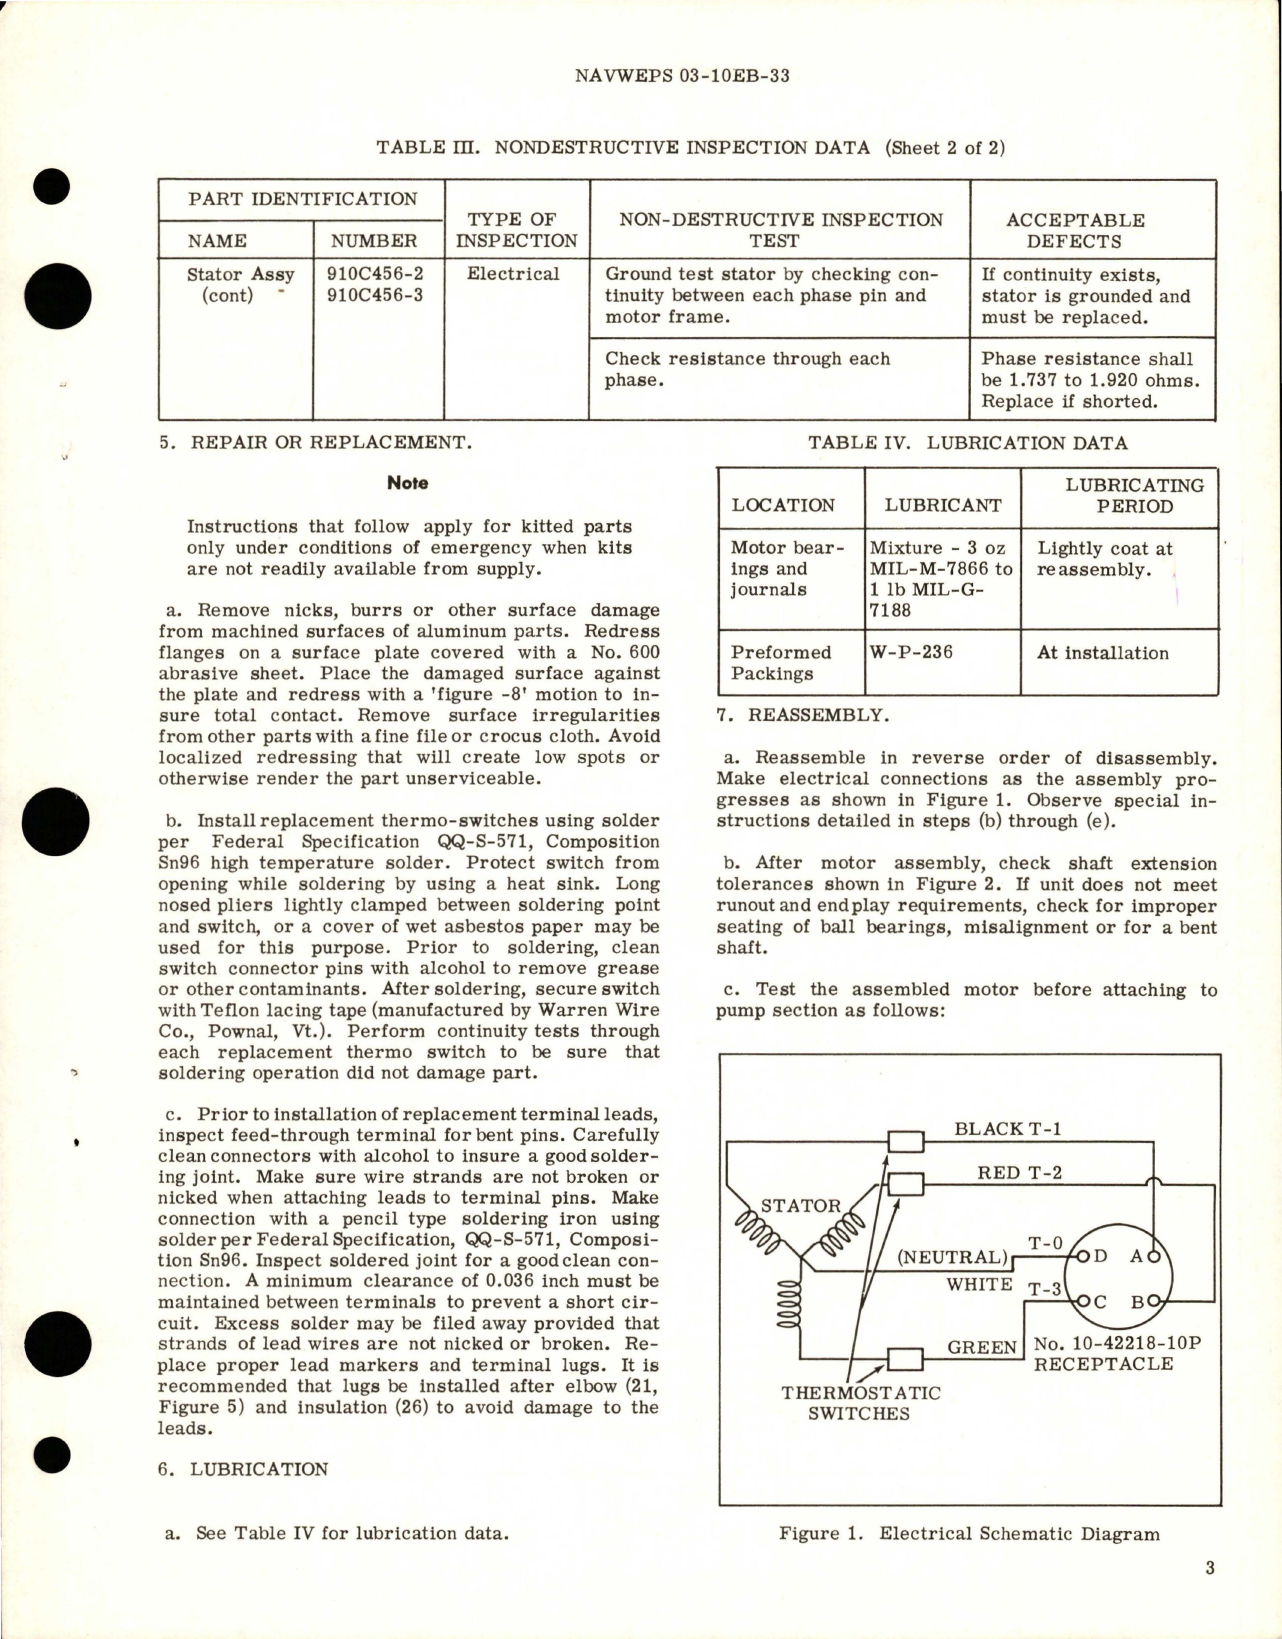 Sample page 5 from AirCorps Library document: Overhaul Instructions with Illustrated Parts Breakdown for Centrifugal Fuel Booster Pump